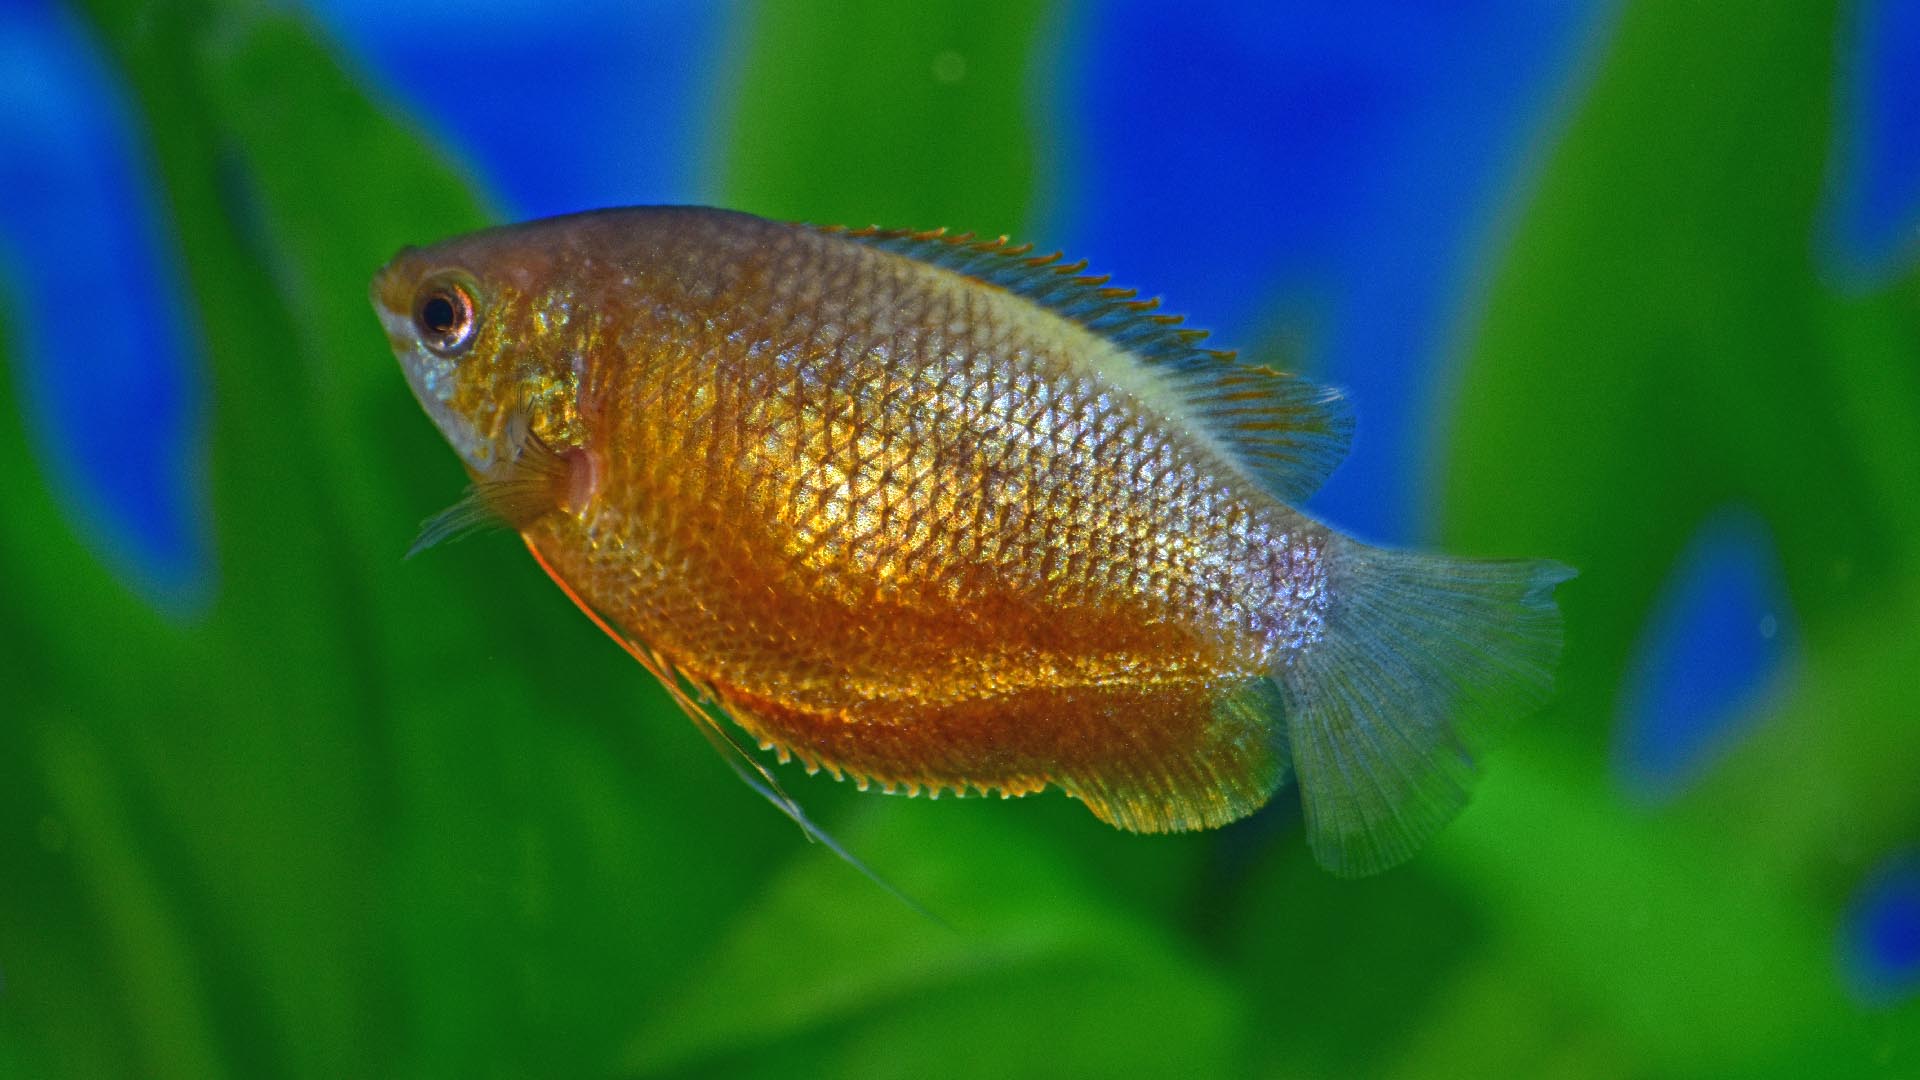 Gouramis, or gouramies, are a group of freshwater anabantiform fishes that comprise the family Osphronemidae. Wayne's AquaWorld